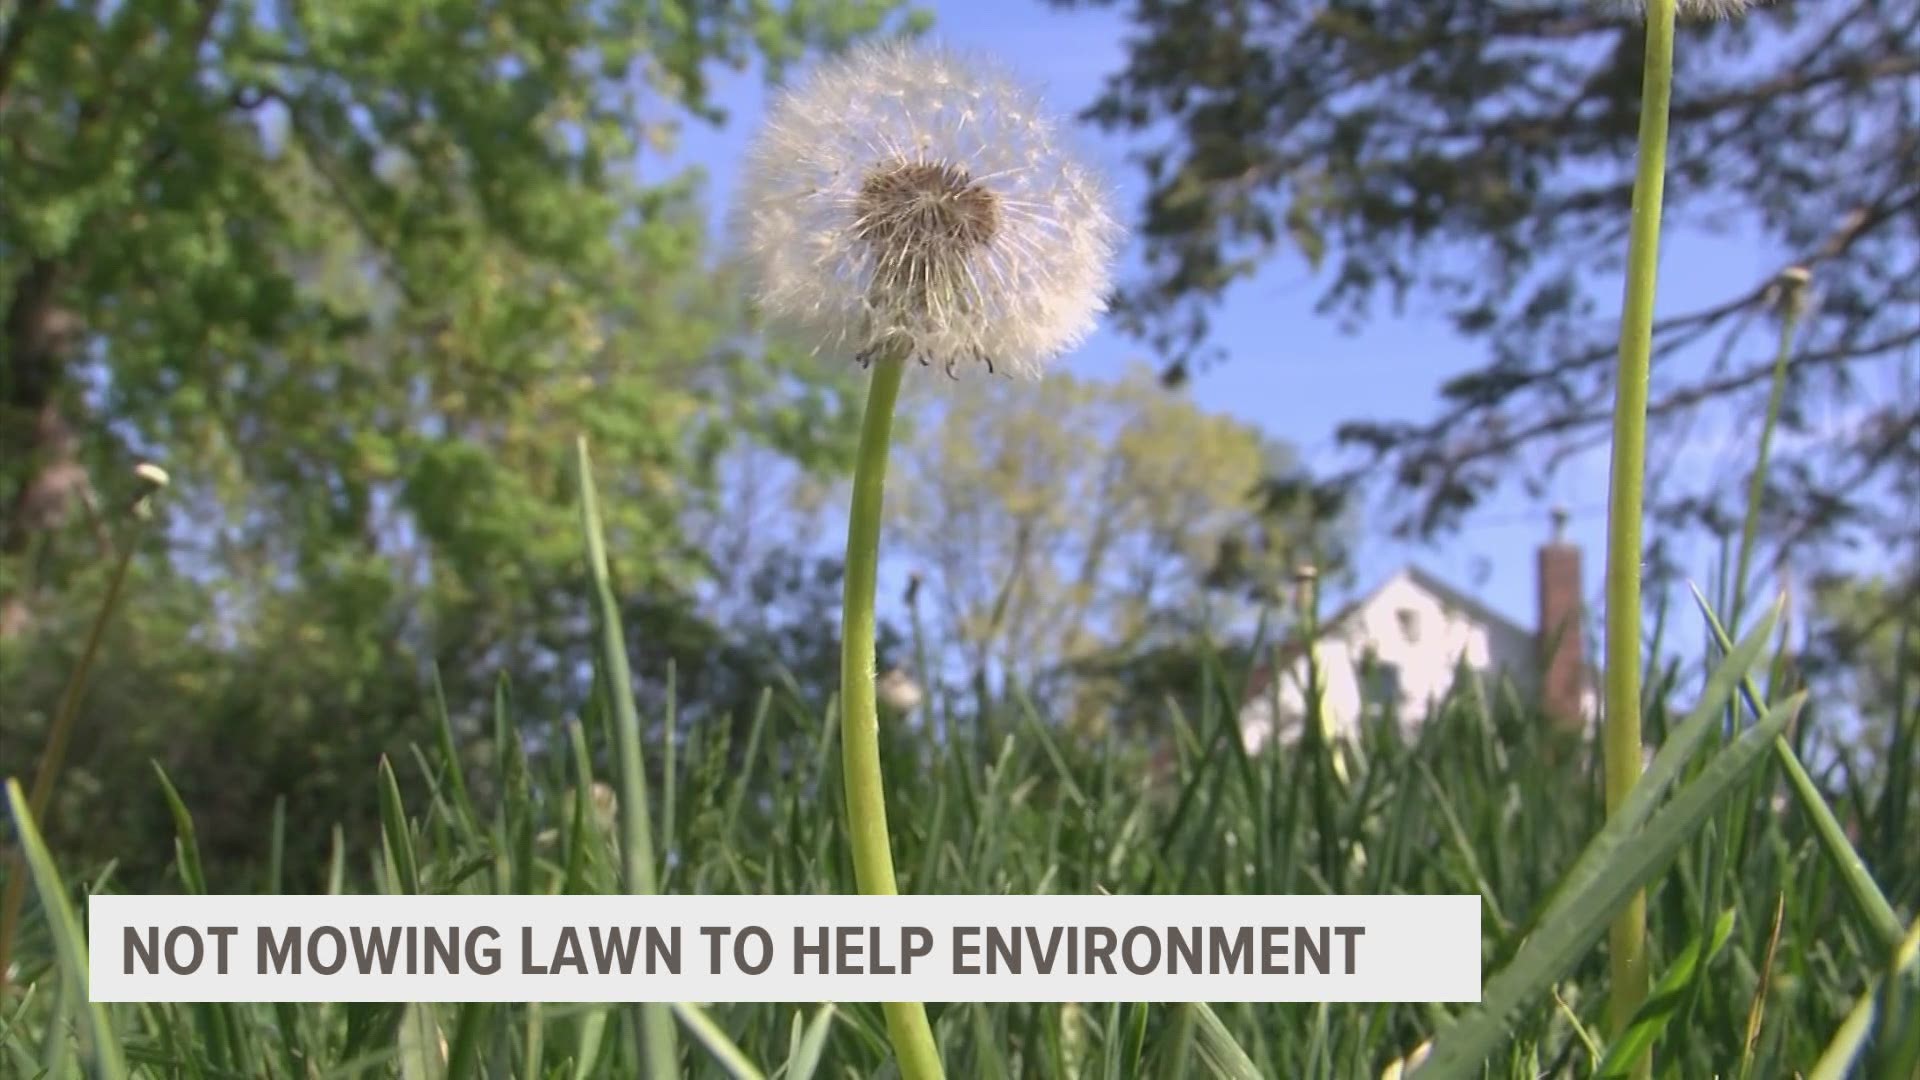 An ISU professor explains the benefits of not mowing the lawn to help the environment and insects.